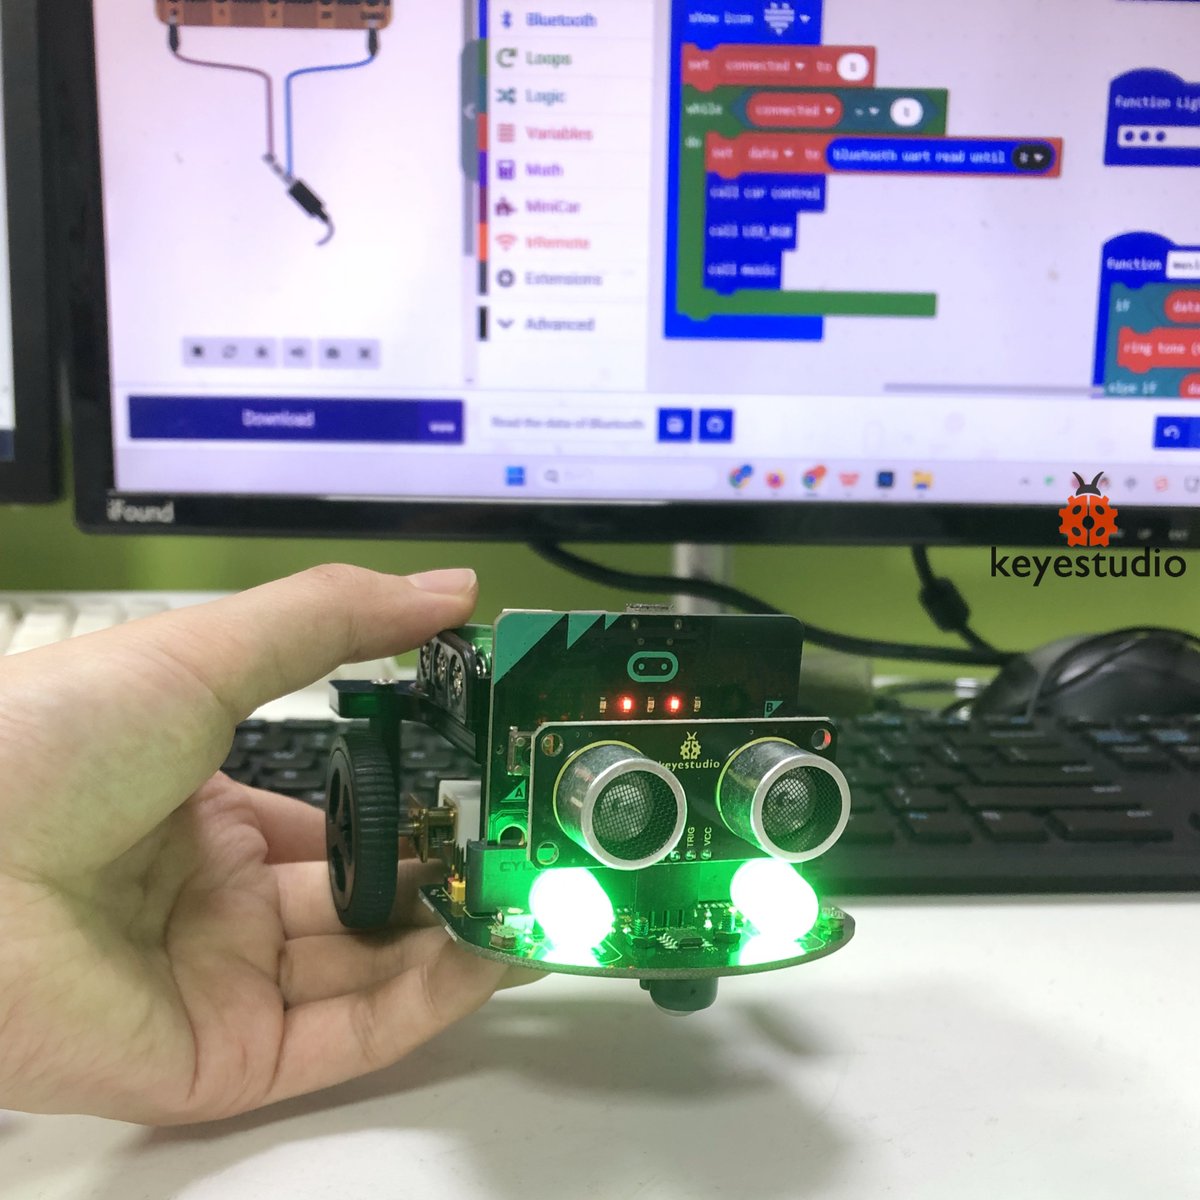 🔓Unlock #keyestudio 🐞 🤖If you’re looking for something fun,you’ve gotta check out the Micro:bit Smart Robot Car. It’s cute, easy, and a ton of fun. Seriously cool 🚗🚀 #microbit #diy #kit #diyproject #coding #maker #stem #EDU #technology #electronics #teacher #Python #Robot